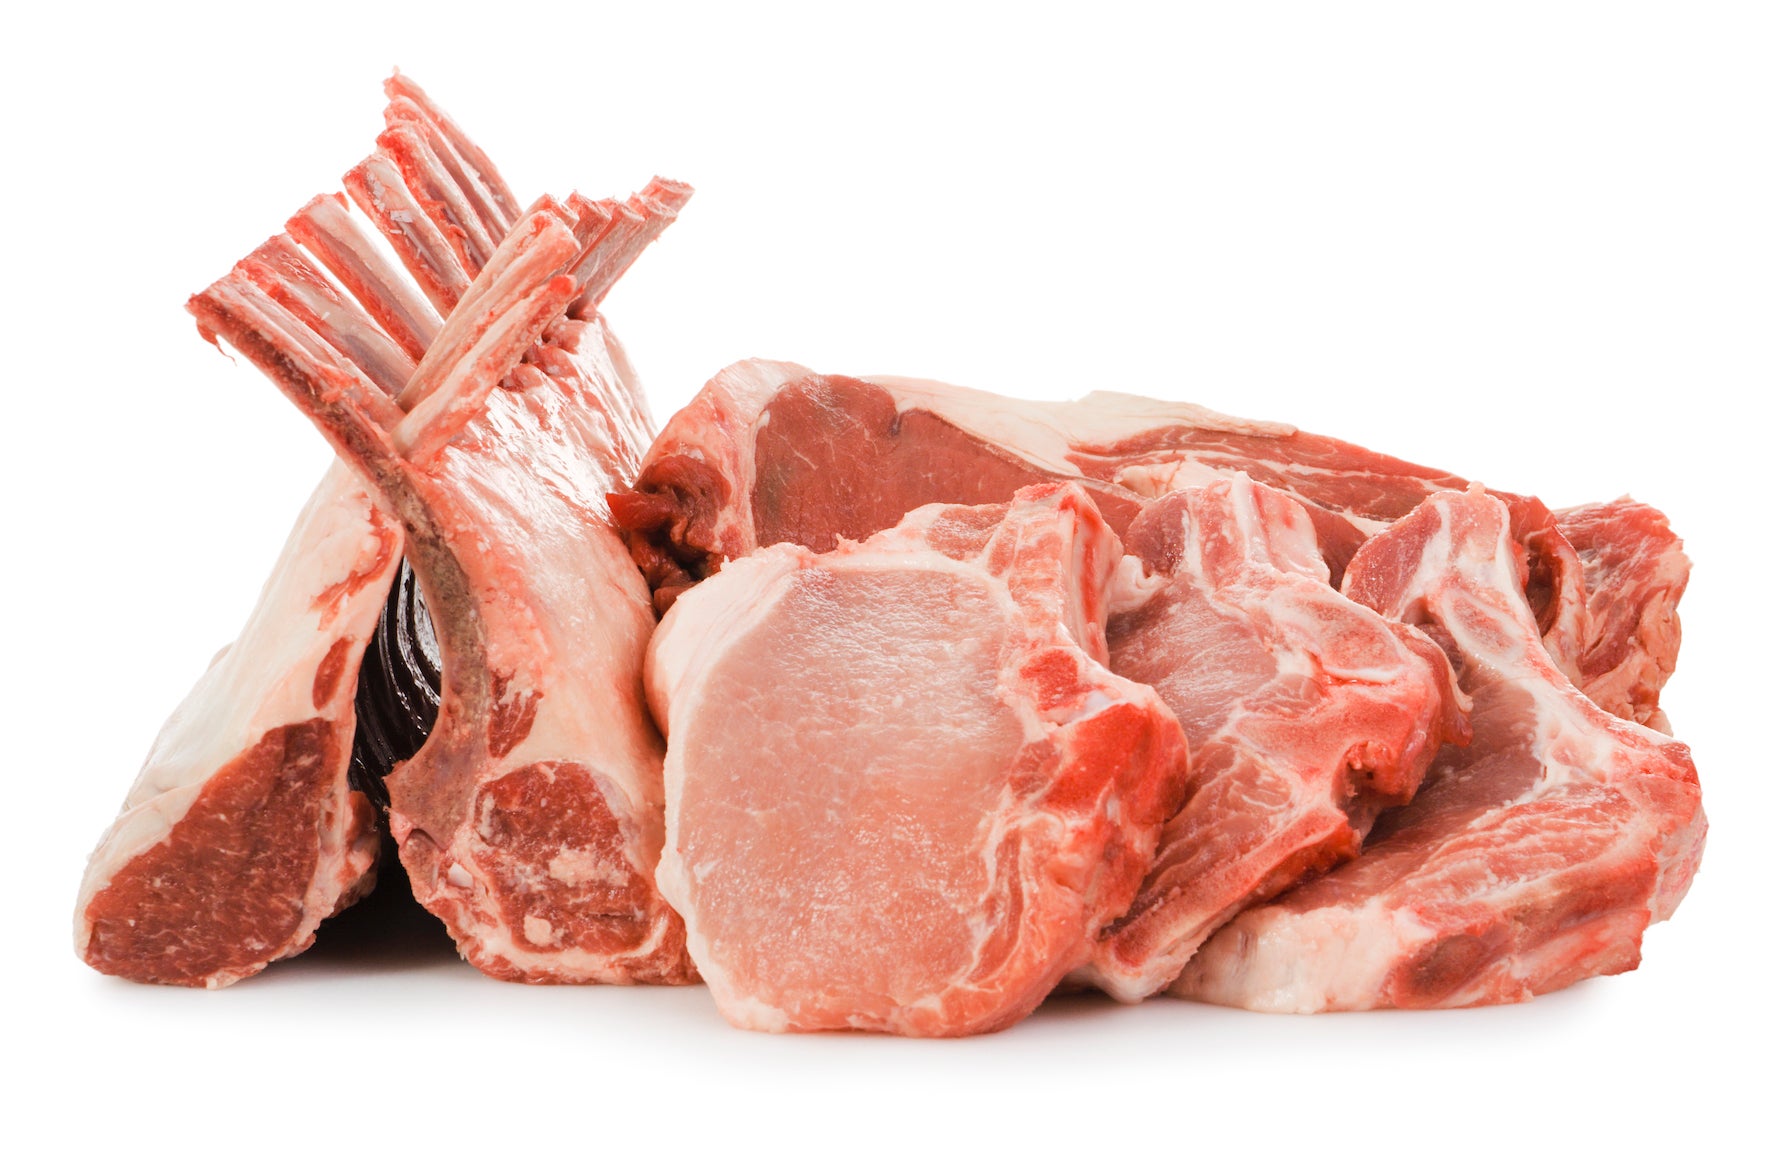 Cuts of pork on a white background